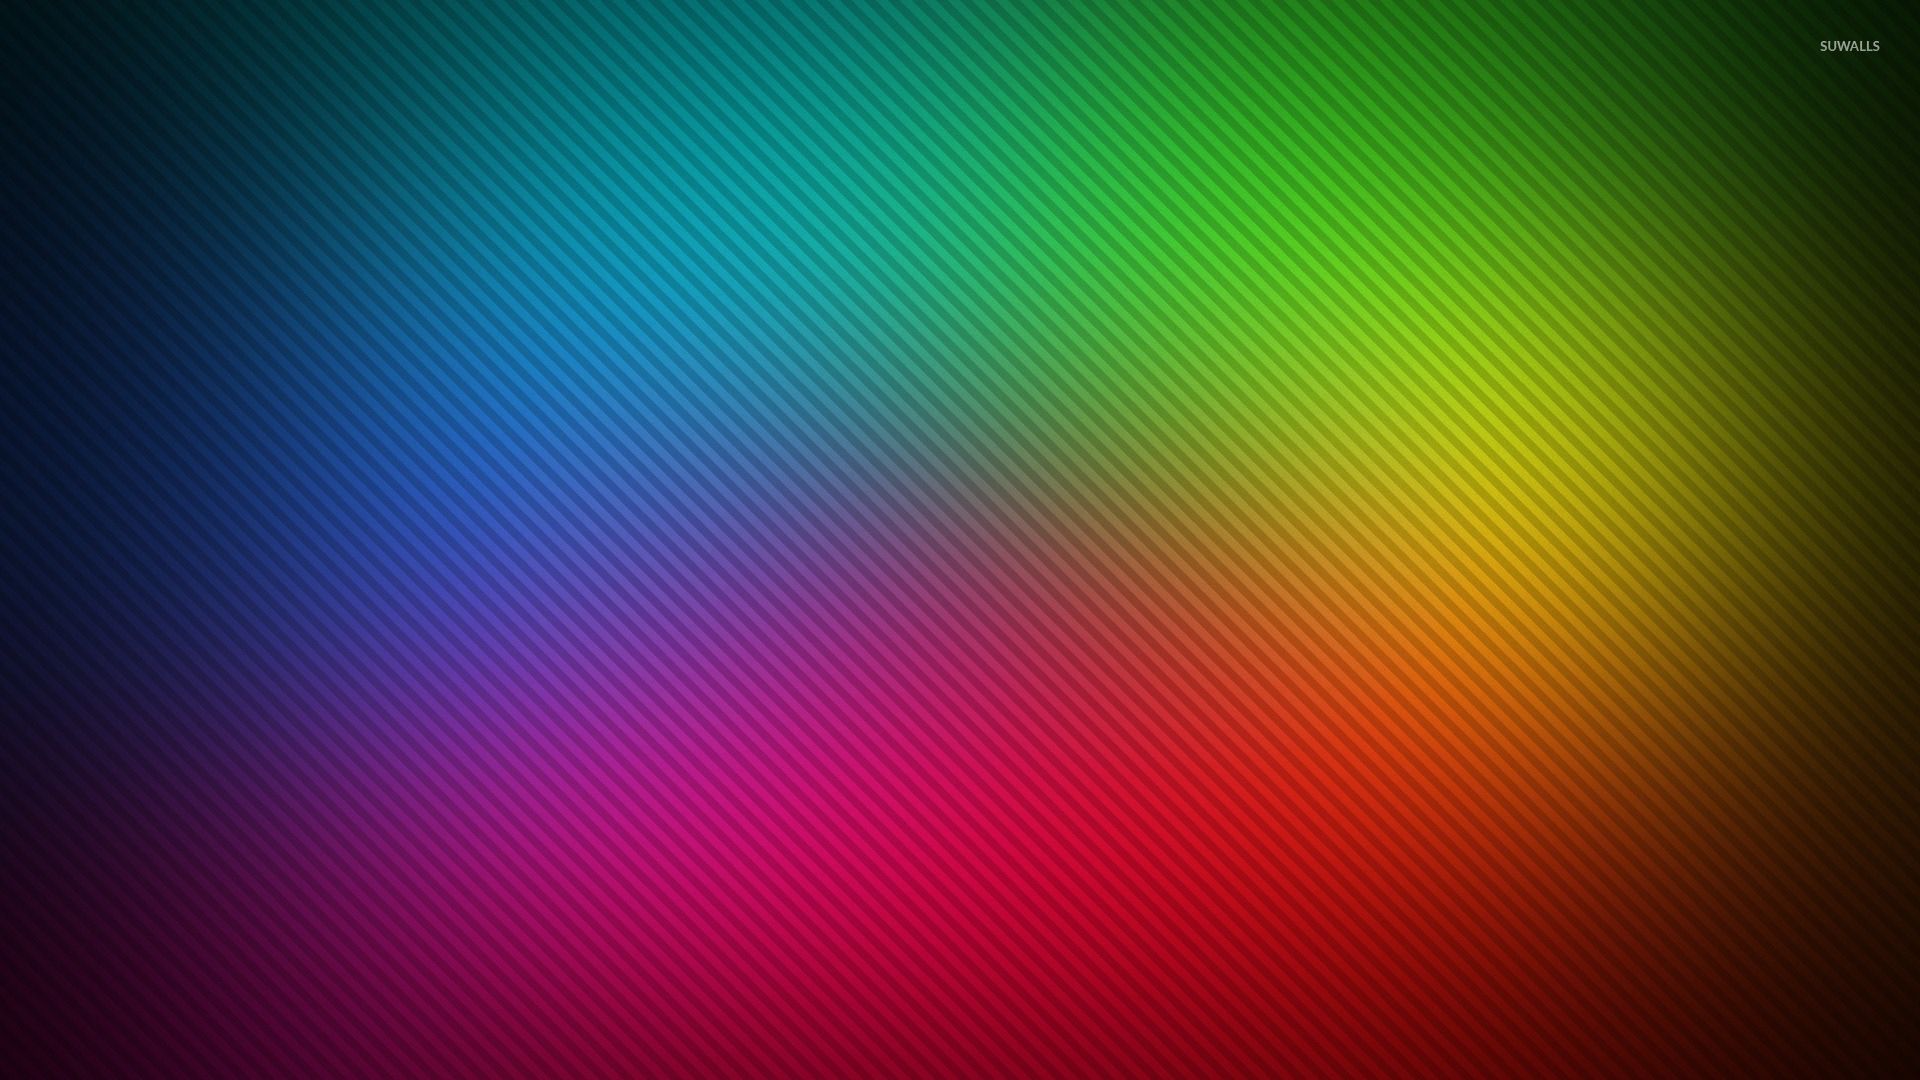 Stripes on top of the colorful blur wallpaper